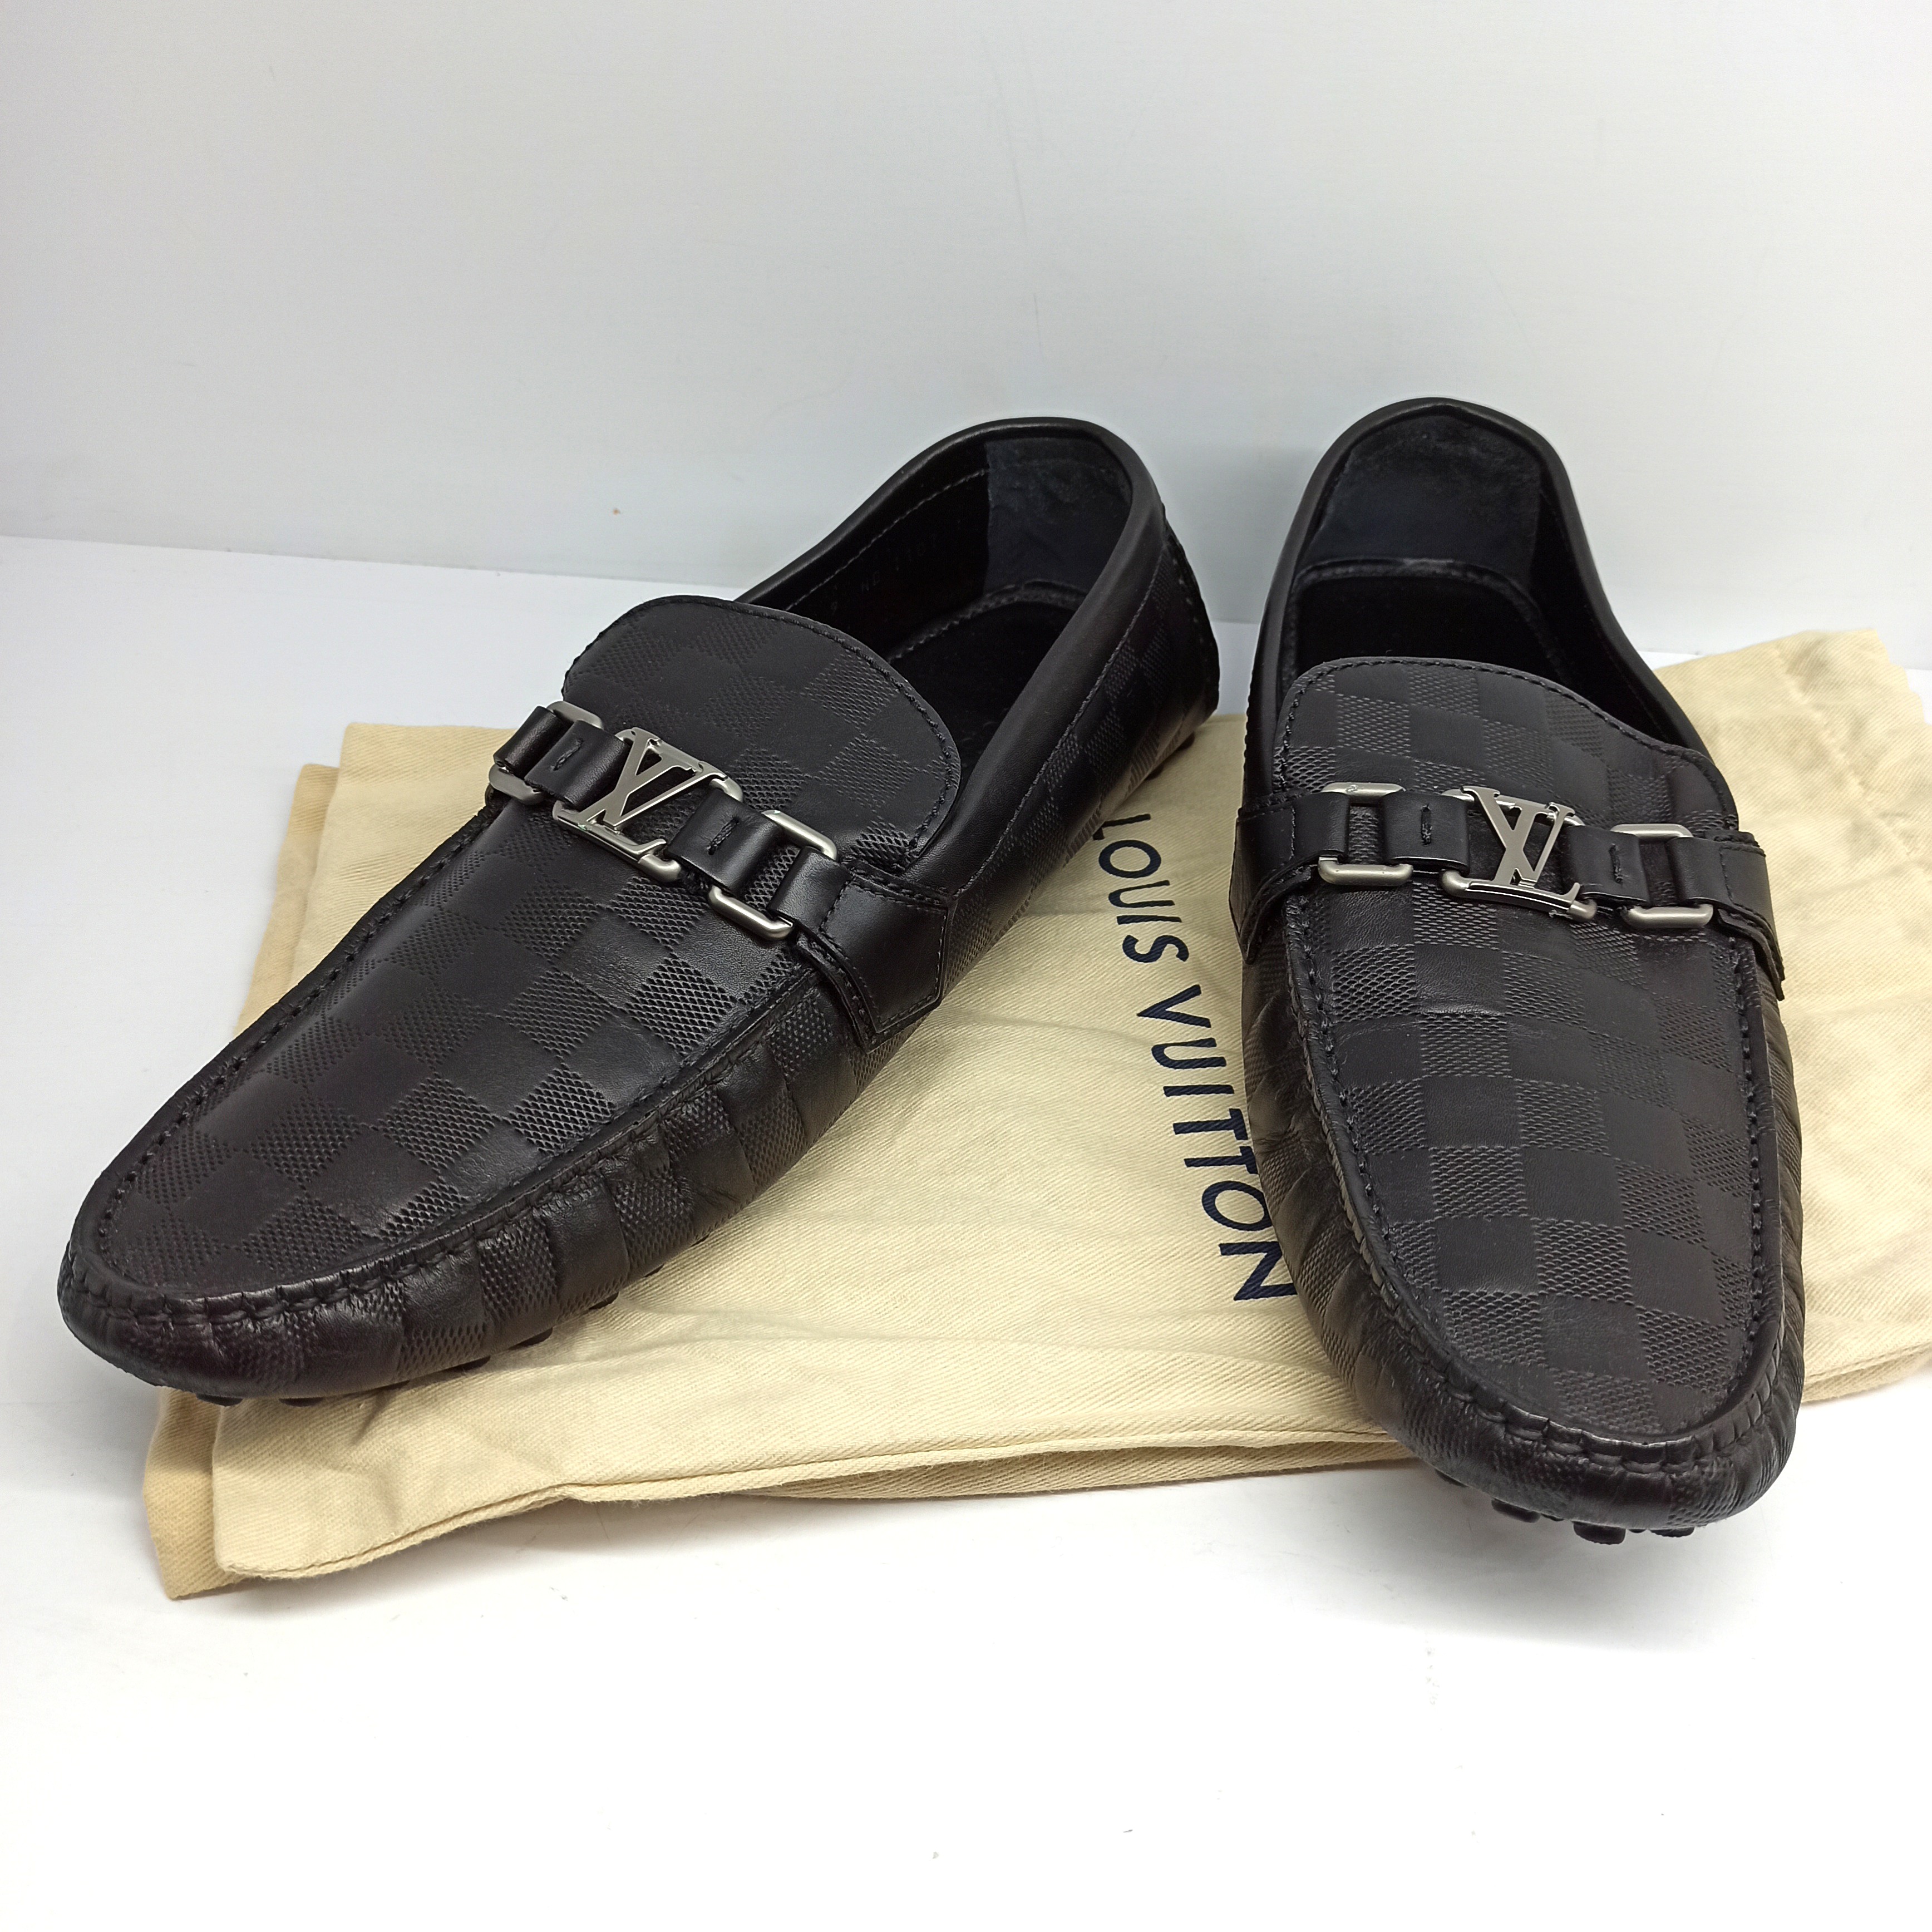 Louis Vuitton Top Sider Boat shoes, Men's Fashion, Footwear, Dress Shoes on  Carousell